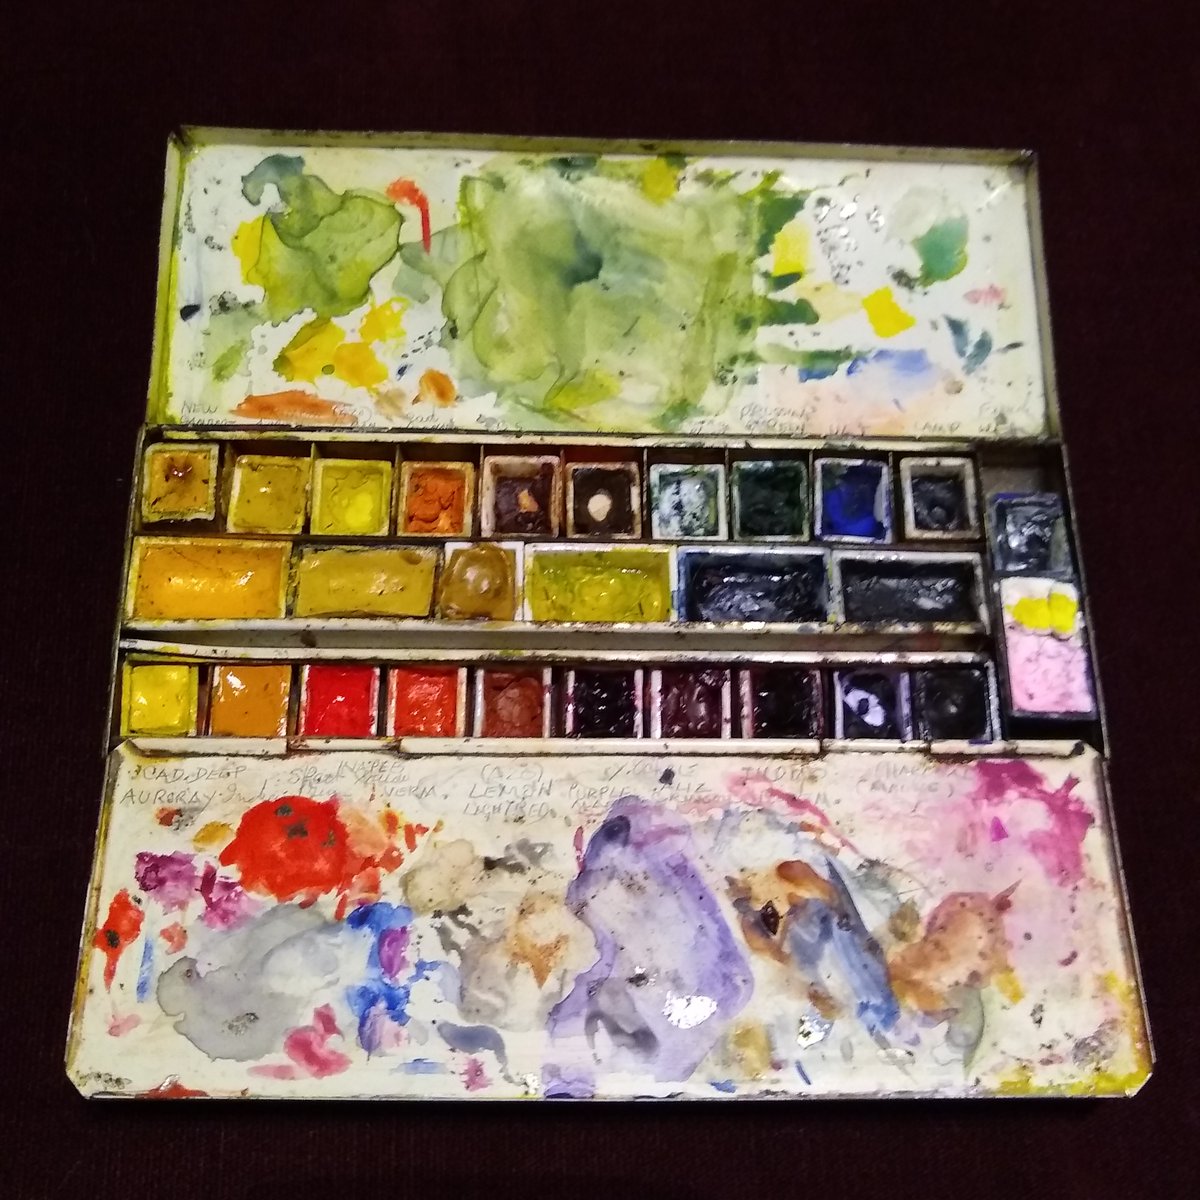 #WorldArtDay, we also have botanist Stella Ross-Craig's wonderful paintbox to inspire you! The lid & palette still bear the last washes mixed by Stella 40 years ago – which plant might have formed her final subject?